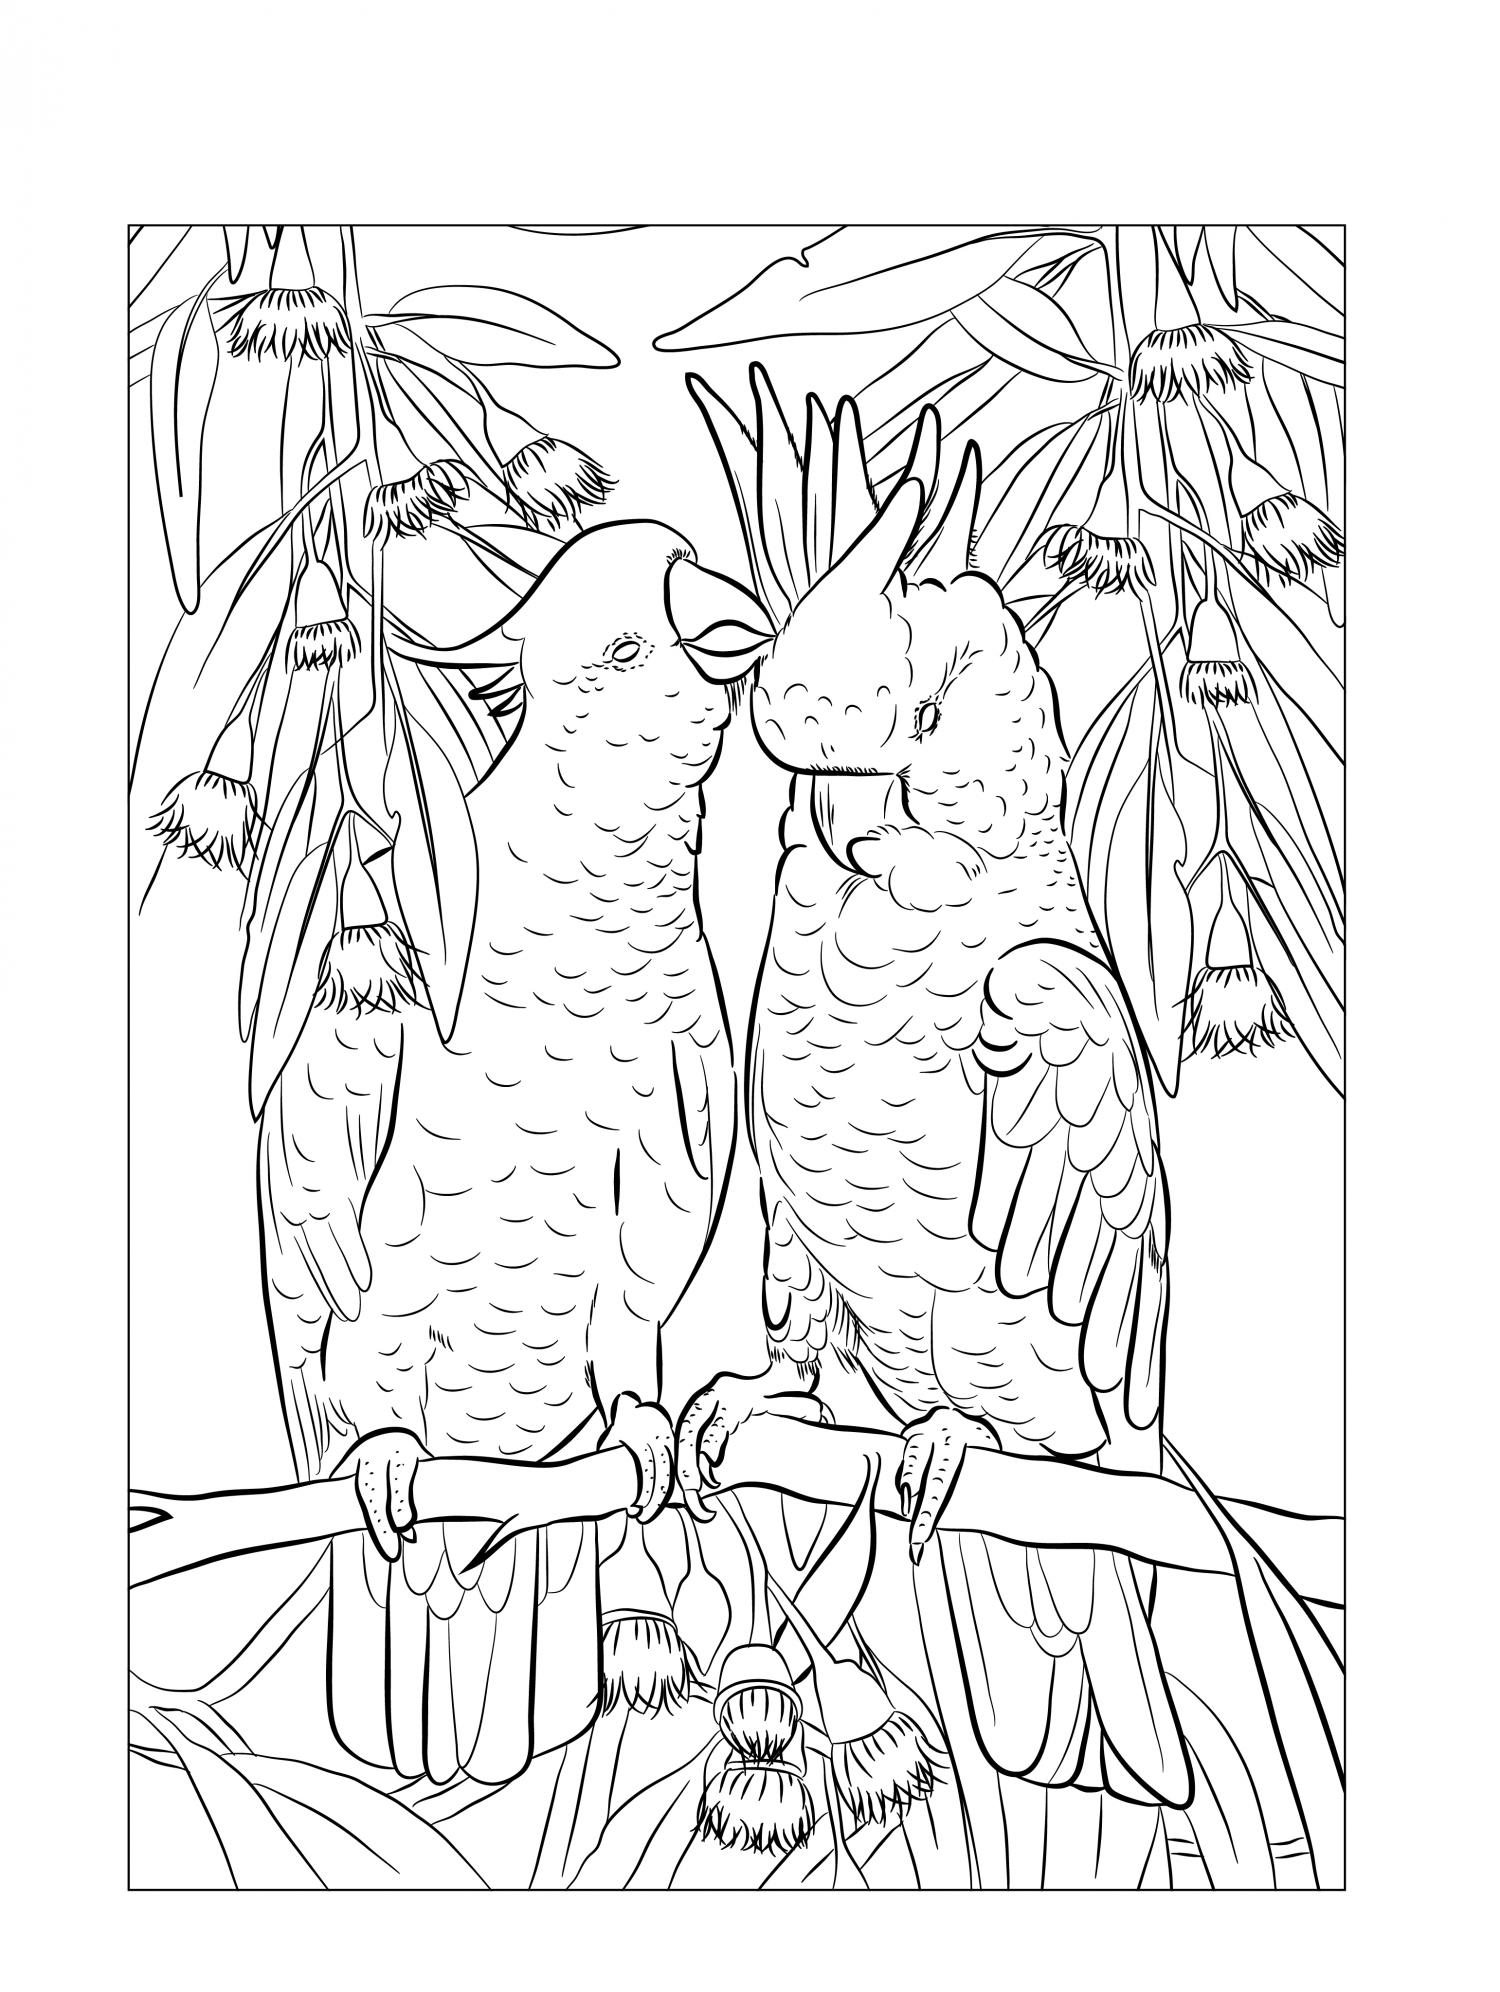 Thumbnail for Mindfulness Colouring-In 